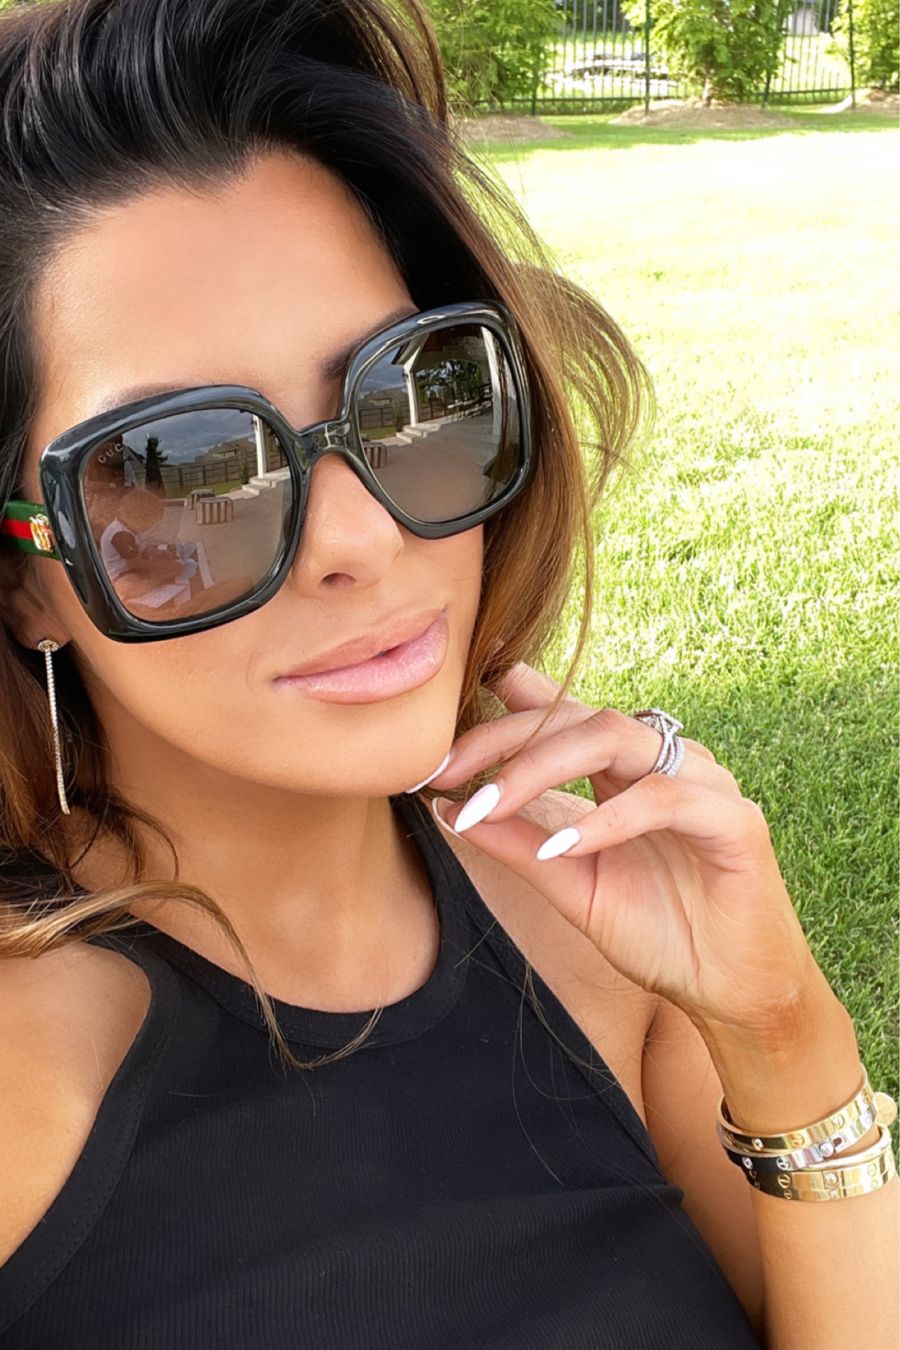 gucci sunglasses, best sunglasses spring 2021, emily ann gemma, casual outfit ideas summer 2021, best sunglasses summer 2021, nail inspiration, best gold hoop earrings summer 2021, Emily ann gemma lip combo | June Instagram Recap by popular US fashion blog, The Sweetest Thing: image of Emily Gemma wearing some black square frame sunglasses and a black tank. 